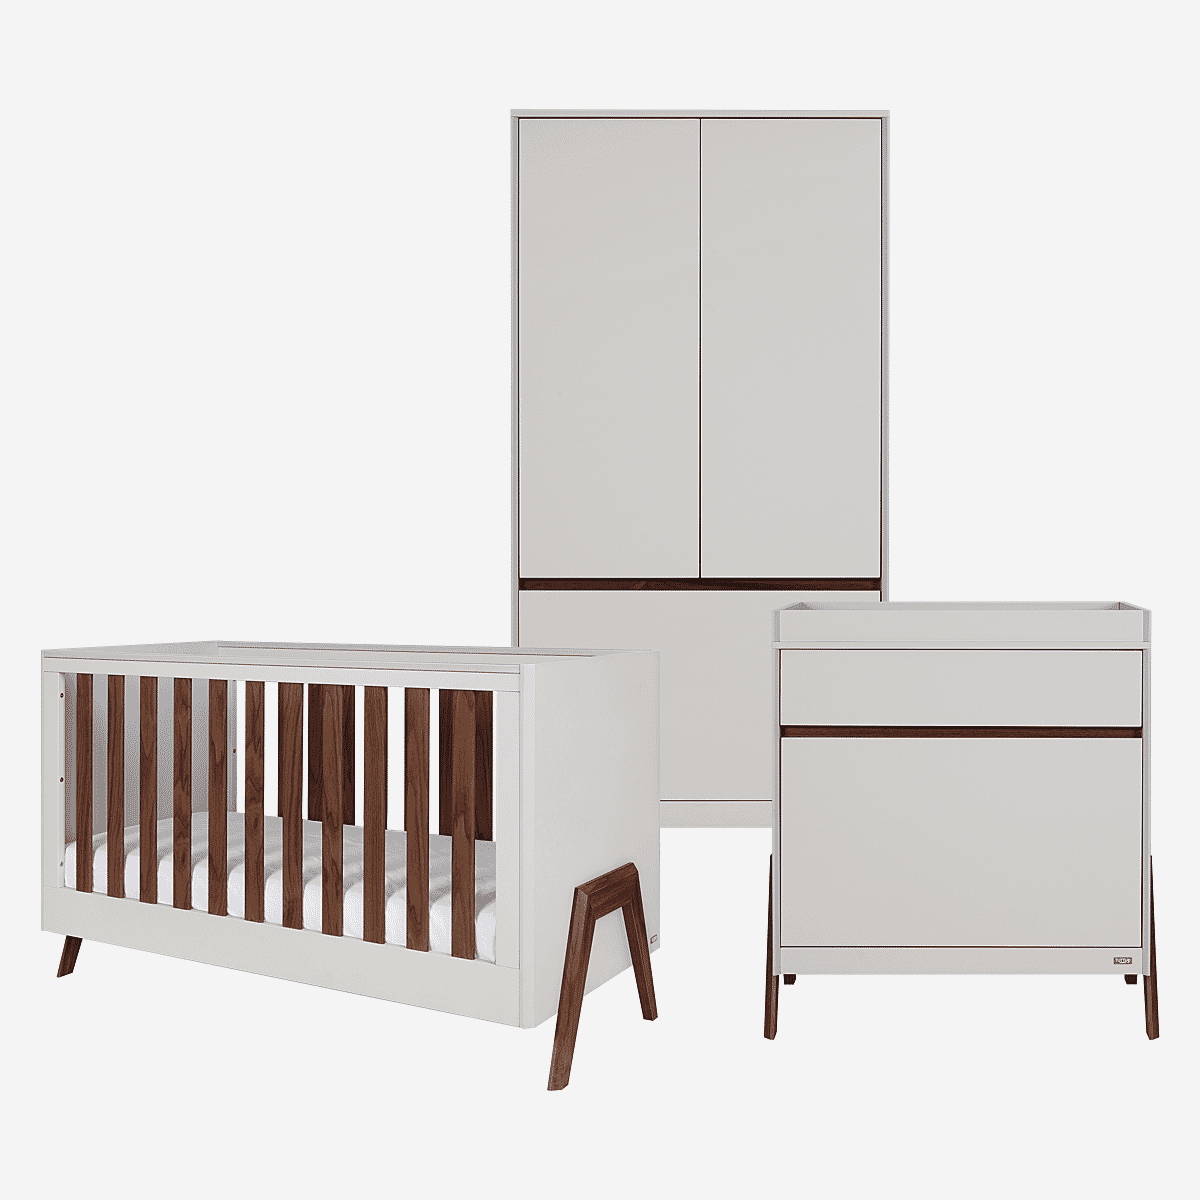 Tutti Bambini Fuori 3pc Room Set - White Sand/Warm Walnut - For Your Little One